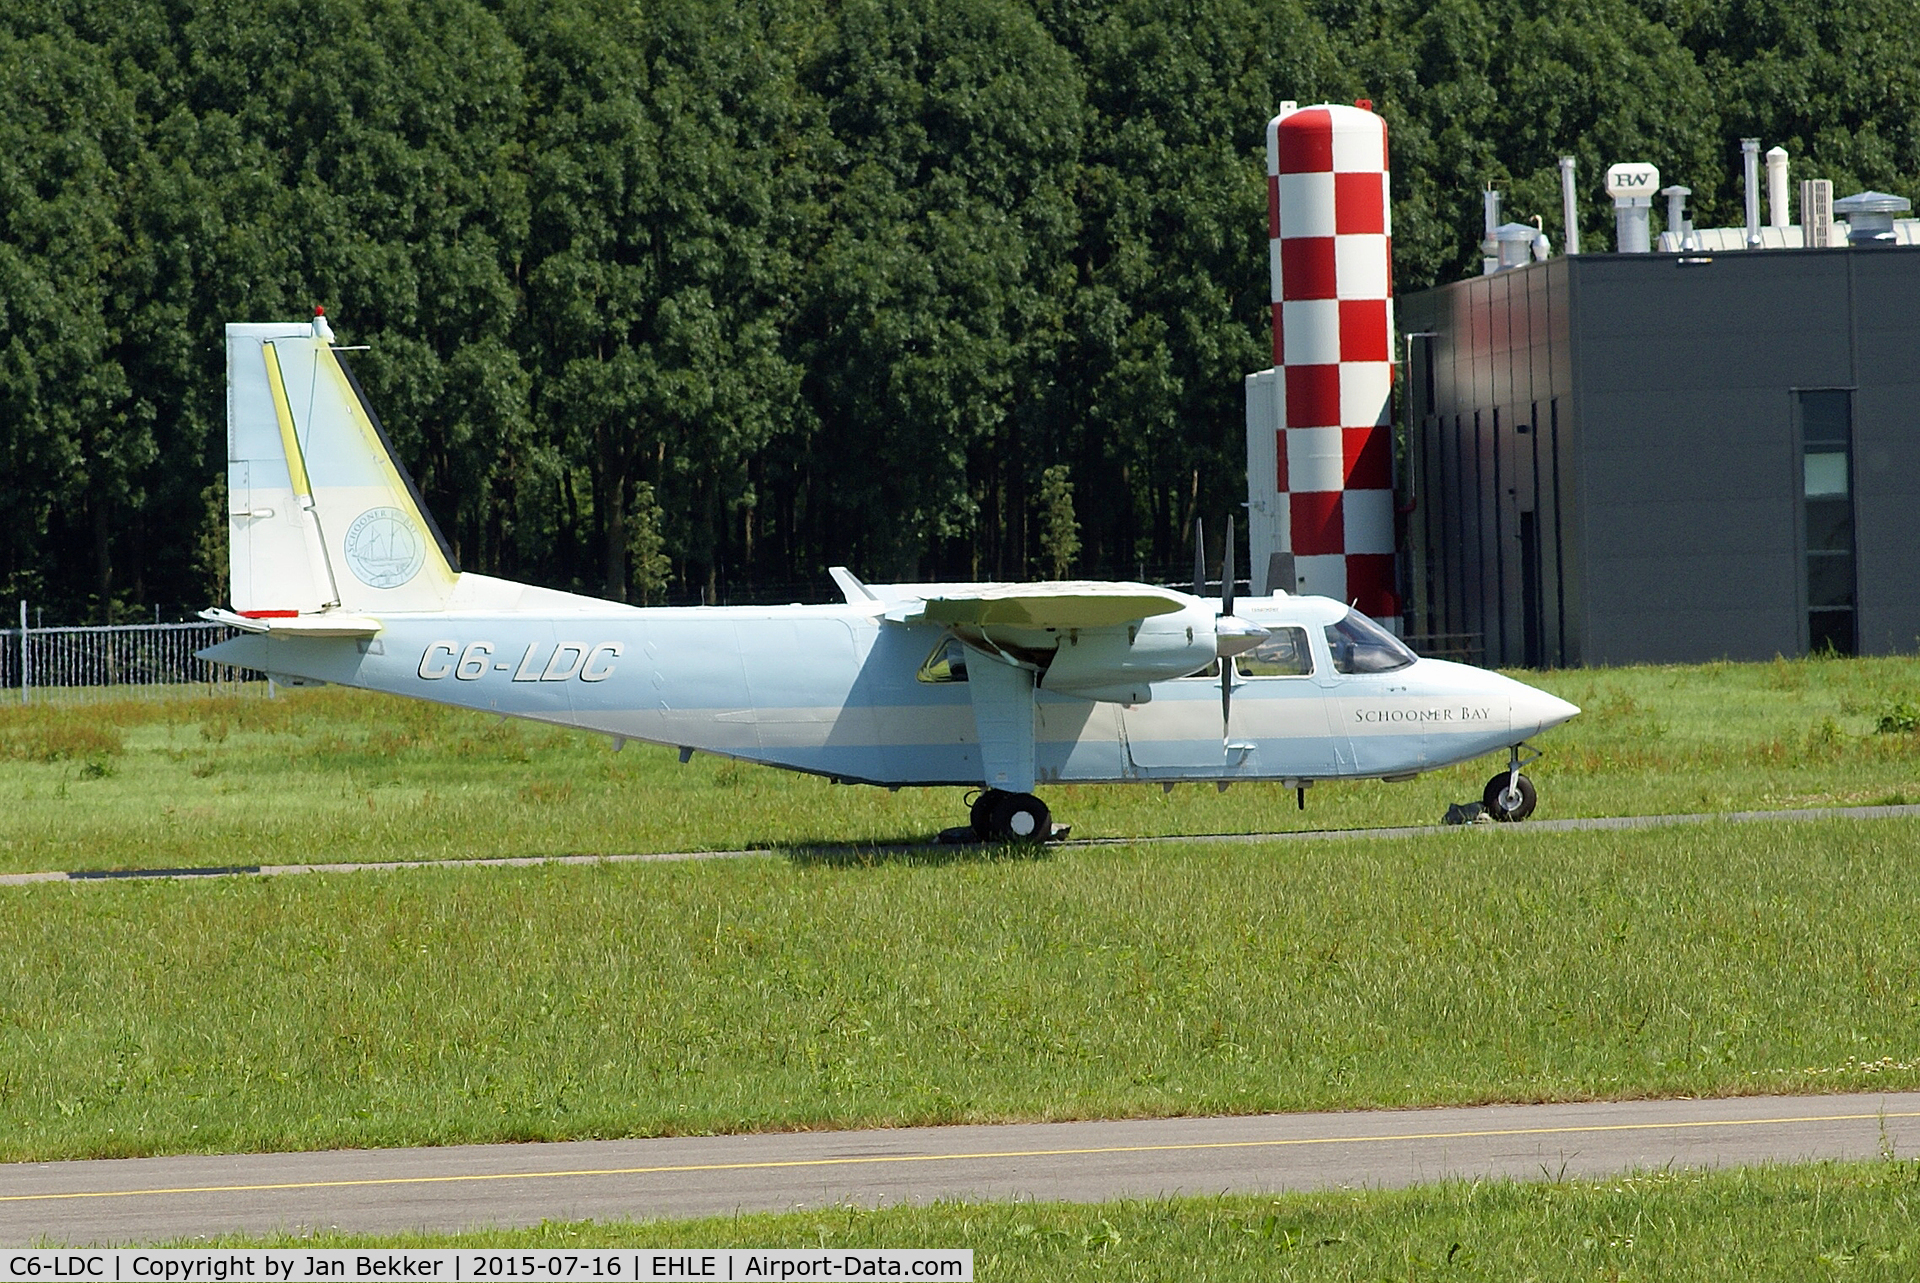 C6-LDC, 1976 Britten-Norman BN-2A-21 Islander C/N 531, It arrived at Lelystad Airport with the stickered registration OY-FHB. That sticker is now removed. The plane will get a new livery here under the registration OY-FHB.